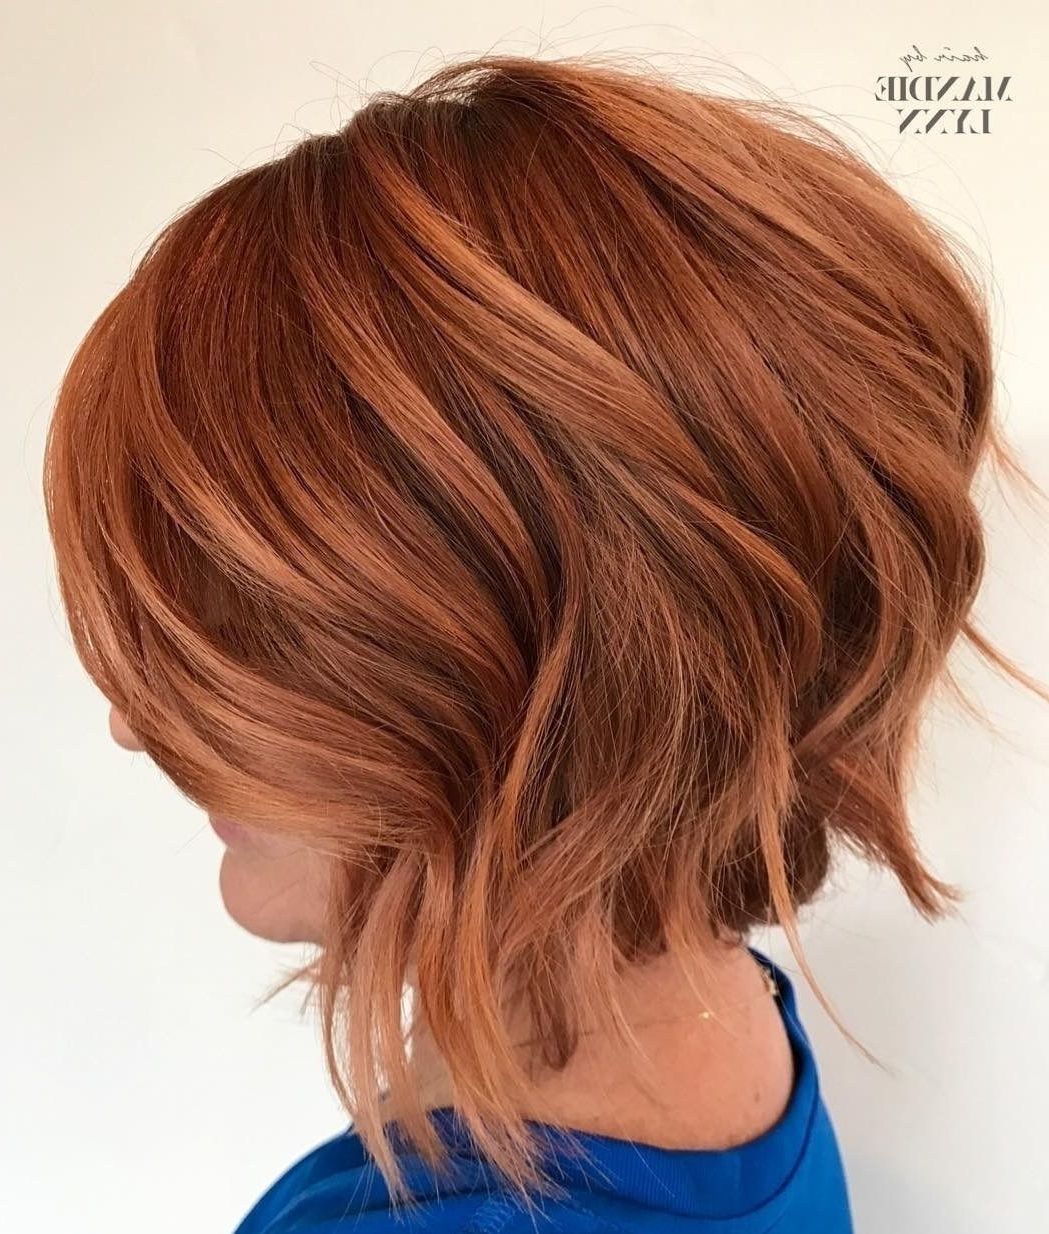 3. Short Messy Bob. The Shorter Bob With Uneven Layers Is Super Chic (View 3 of 25)